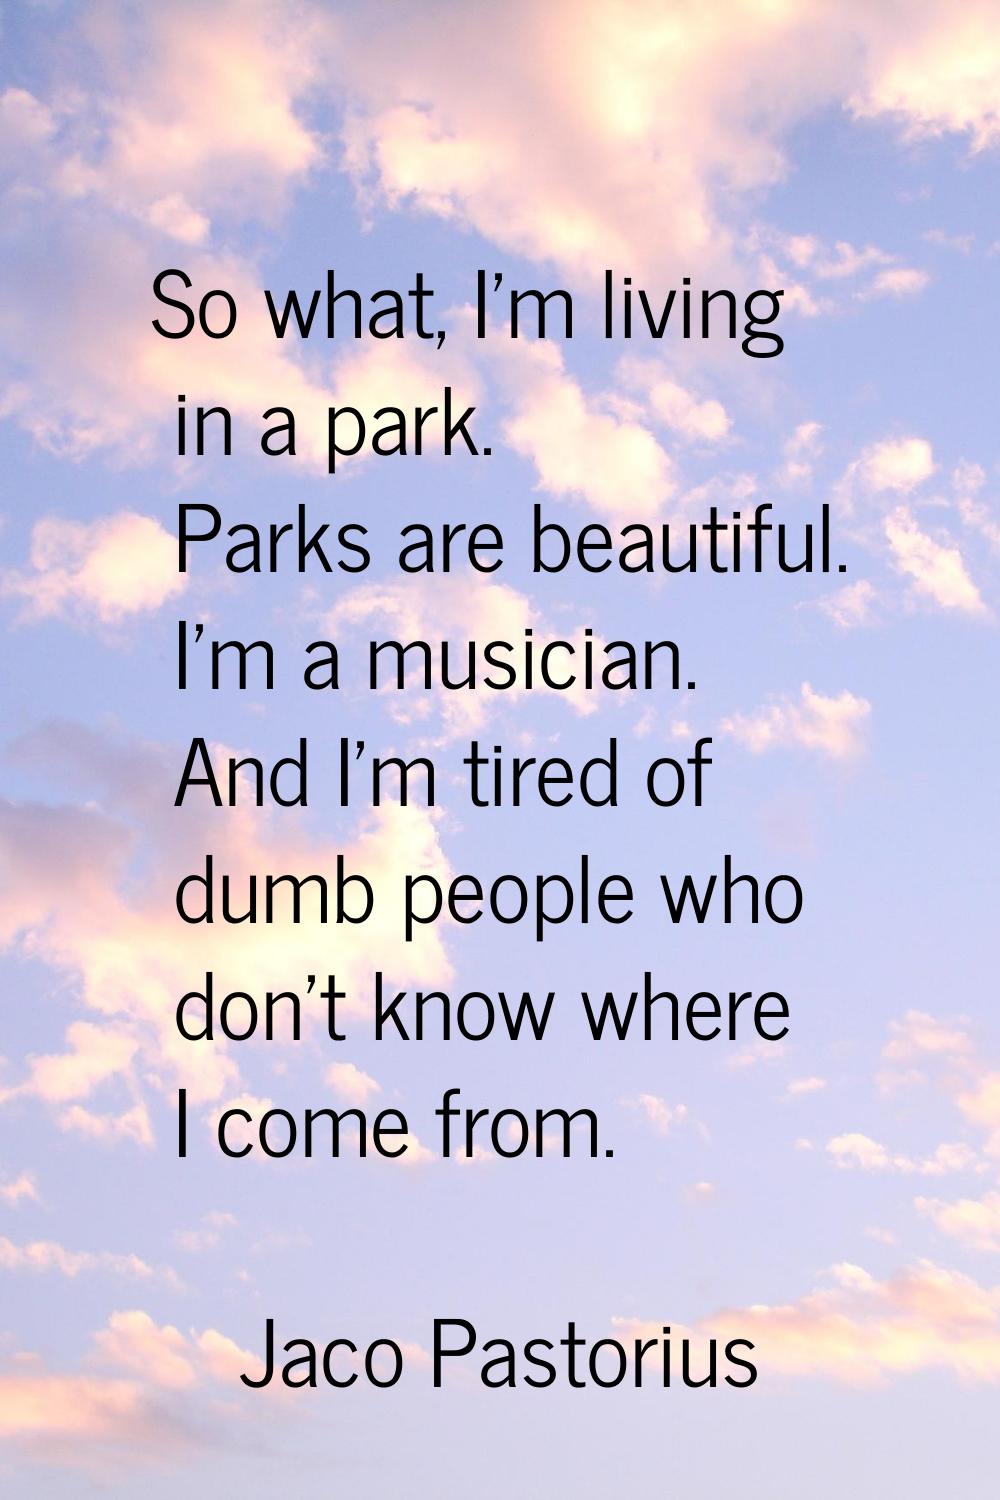 So what, I'm living in a park. Parks are beautiful. I'm a musician. And I'm tired of dumb people wh